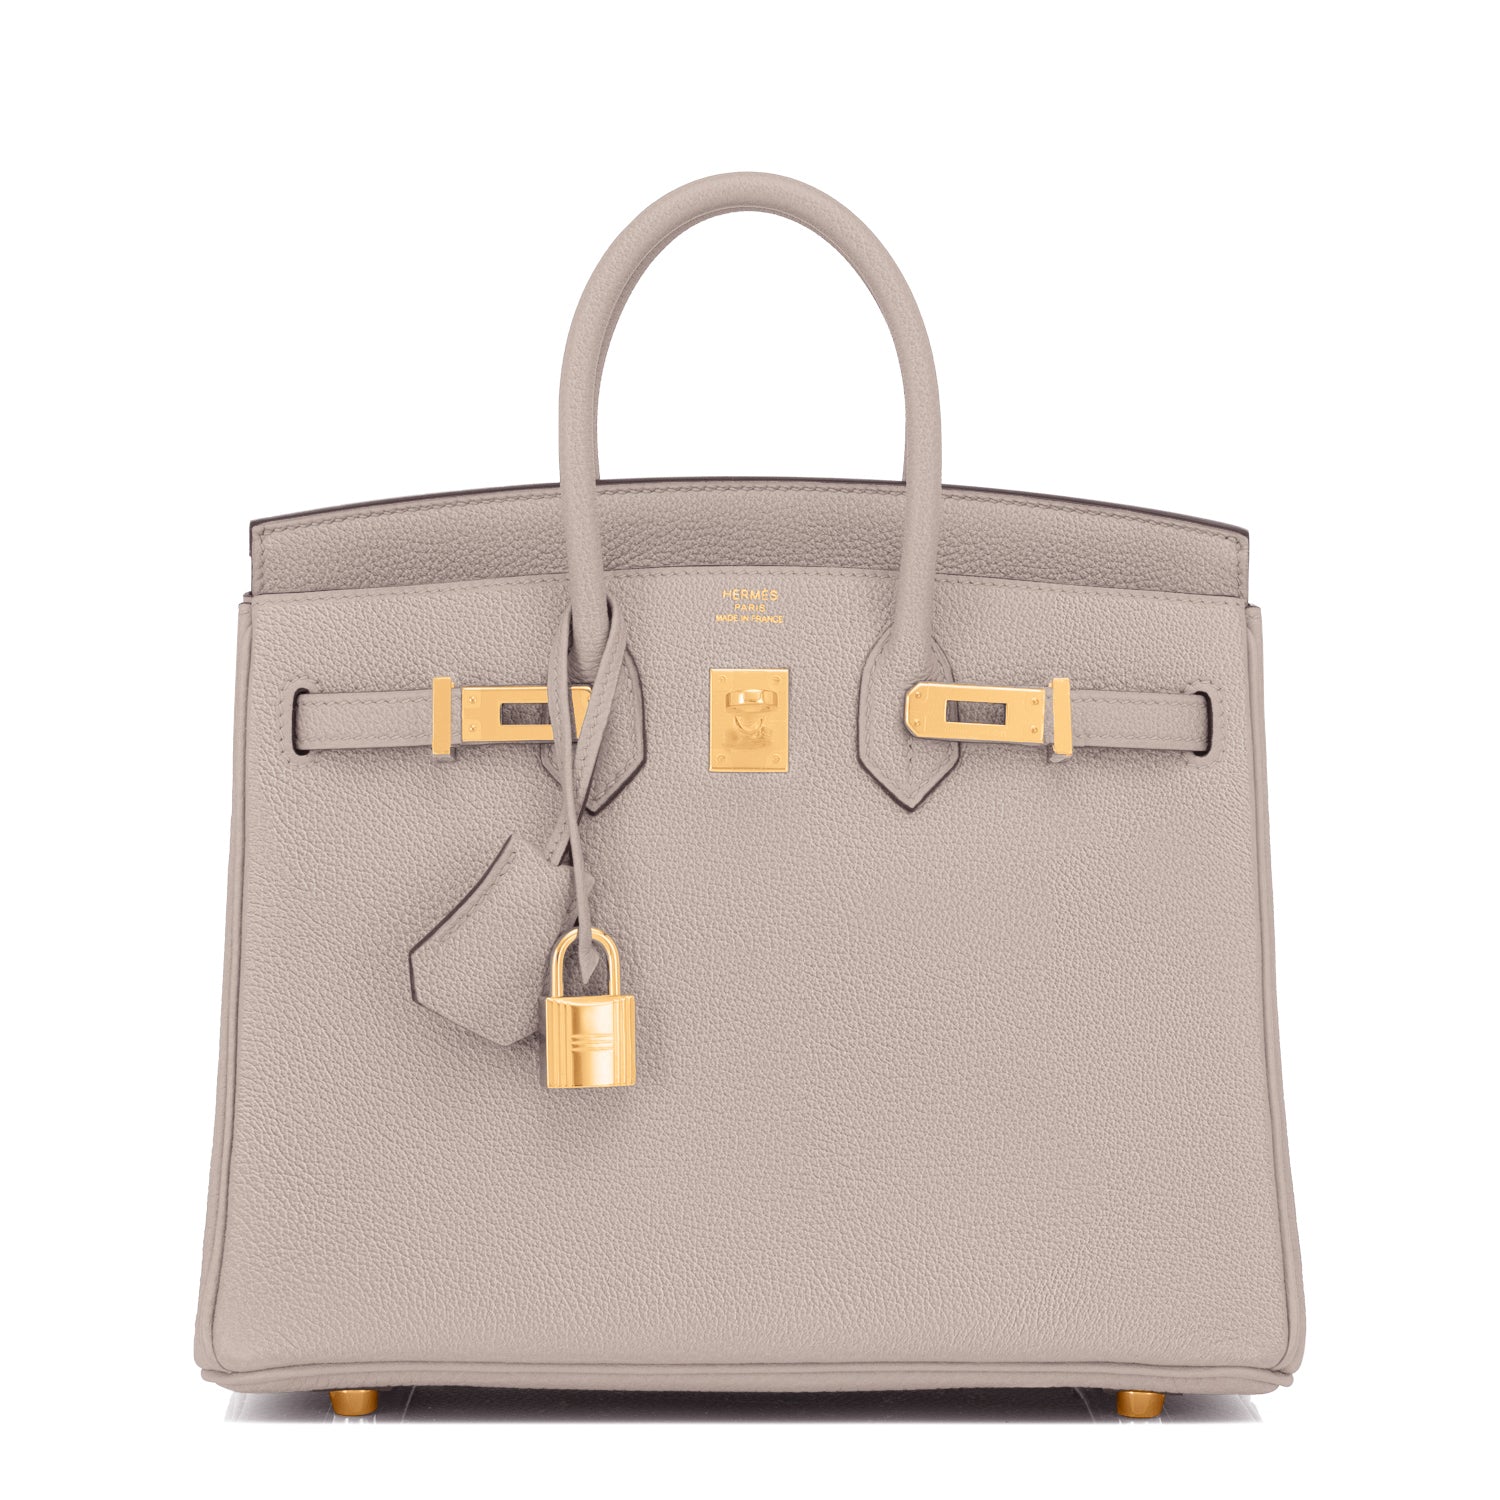 Hermes, Bags, Herms Birkin Bag Rare Sellier Style In Color Gris Etain